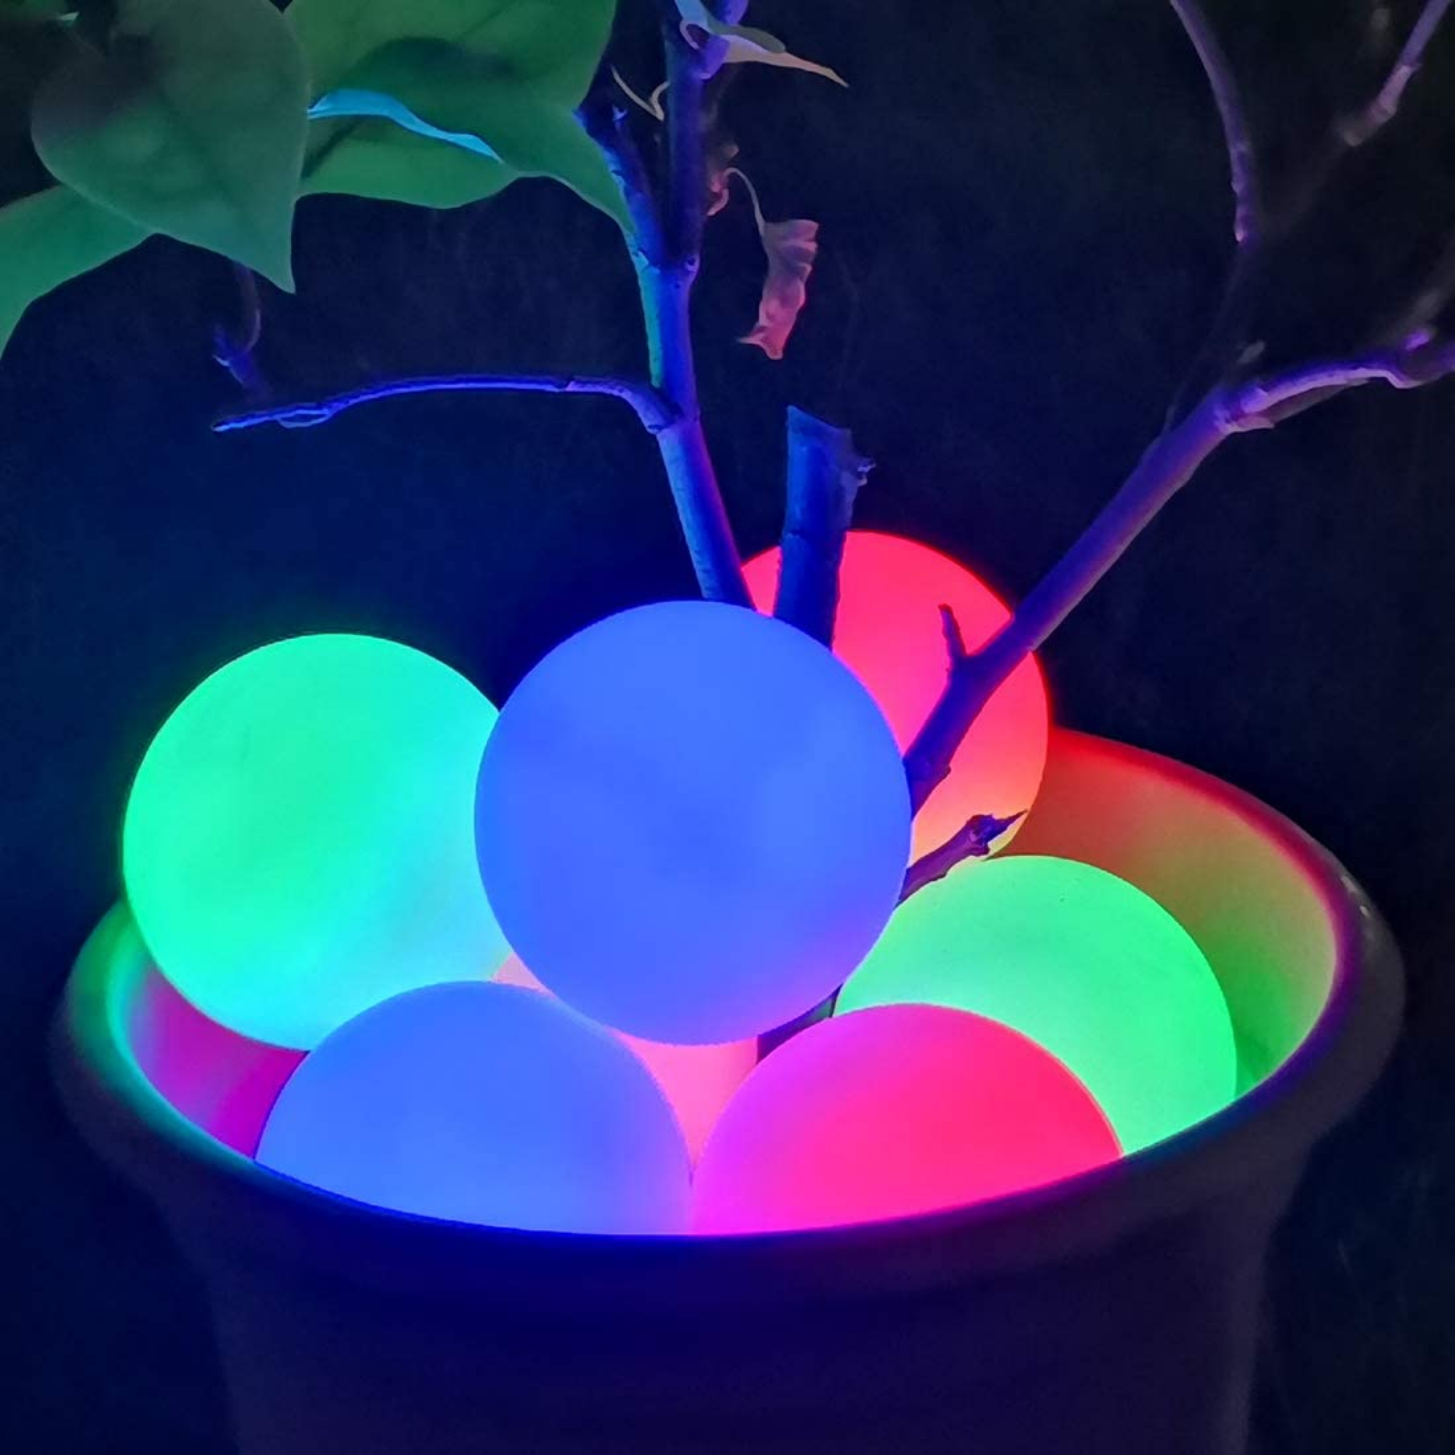 Sensorii's light up toys- 6 of Sensorii's light-up waterproof balls, 2 are green, 2 are blue, and 2 are red. The 6 balls are lit up in the dark and placed in a large plant pot